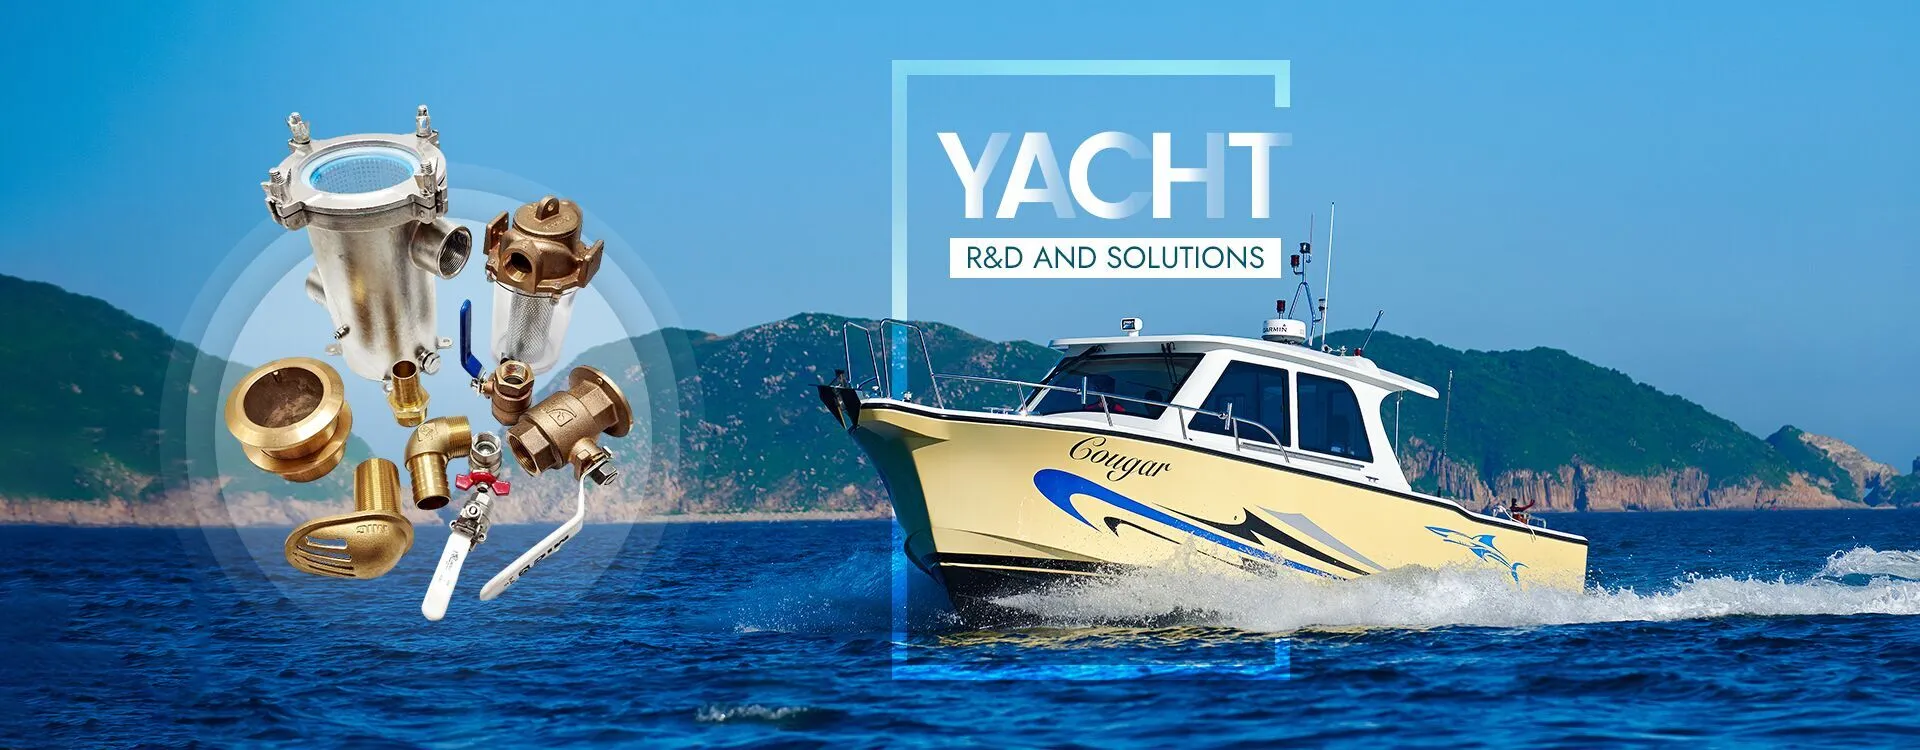 Yacht R&D AND SOLUTIONS